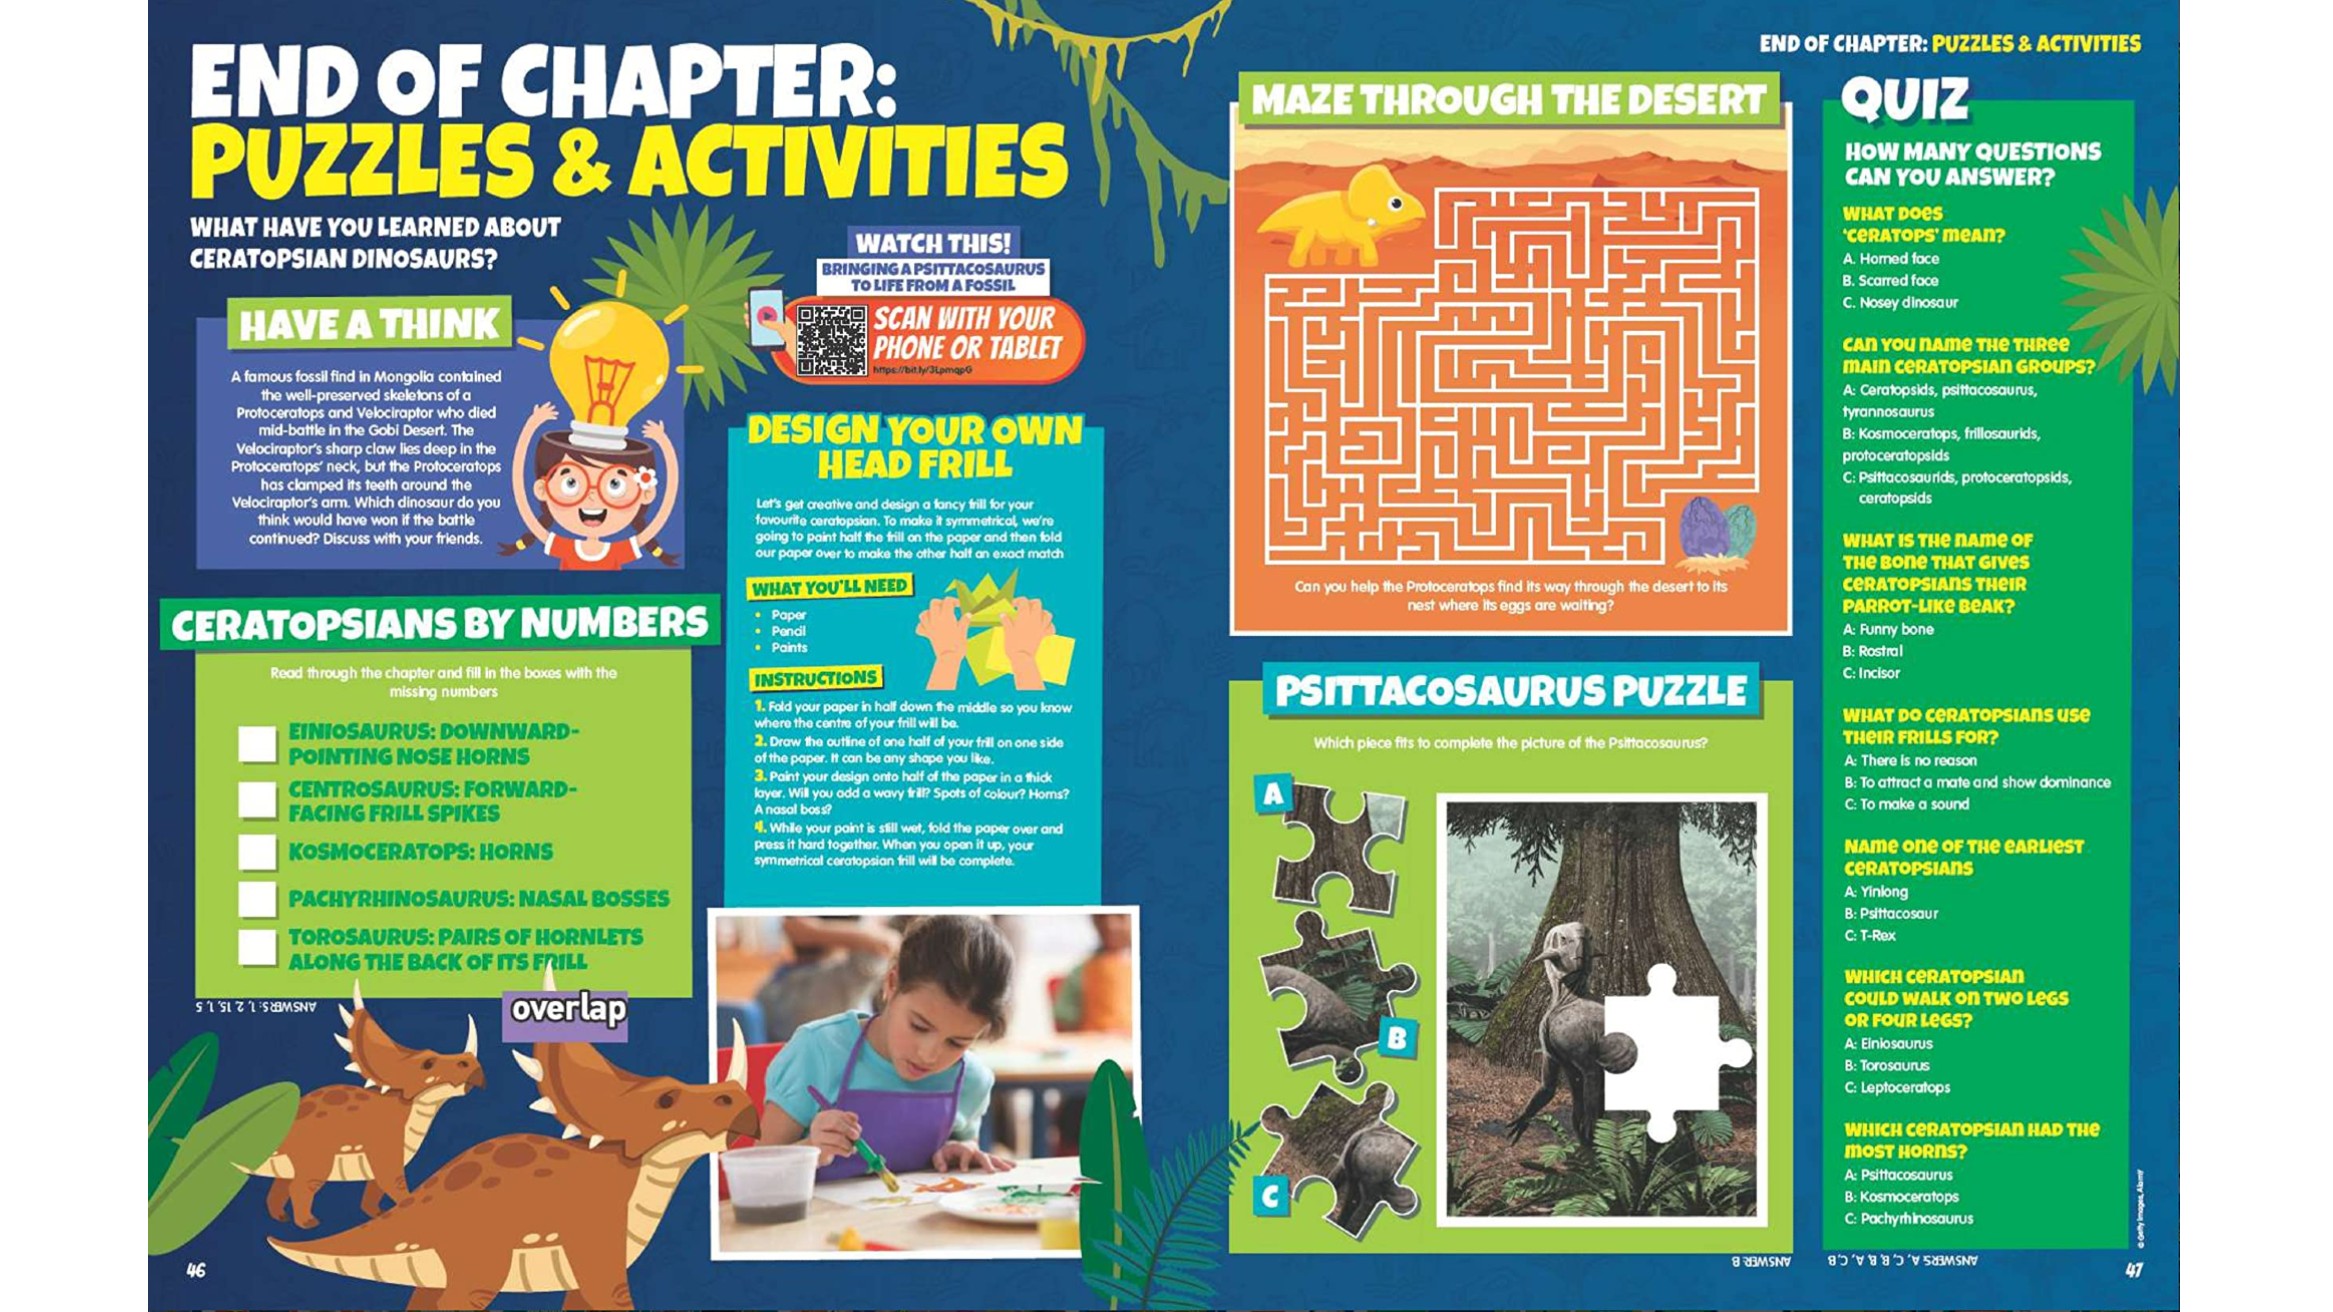 An example of a spread within the magazine which is filled with colourful cartoons, games, puzzles and challenges